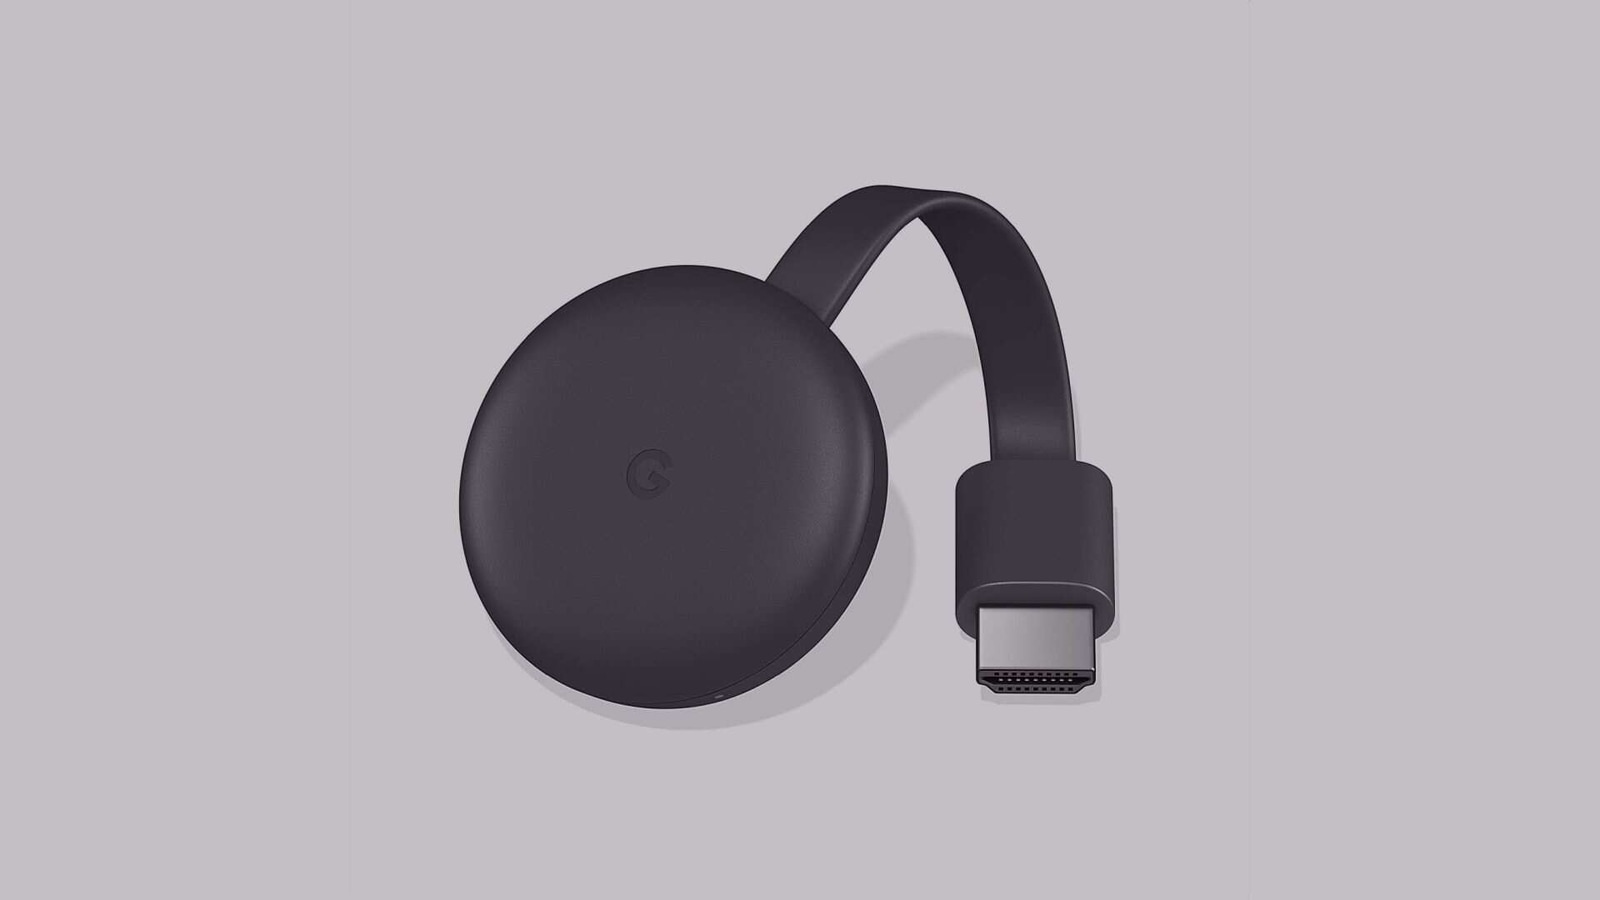 Chromecast with Google TV is More Than Just a Name Change